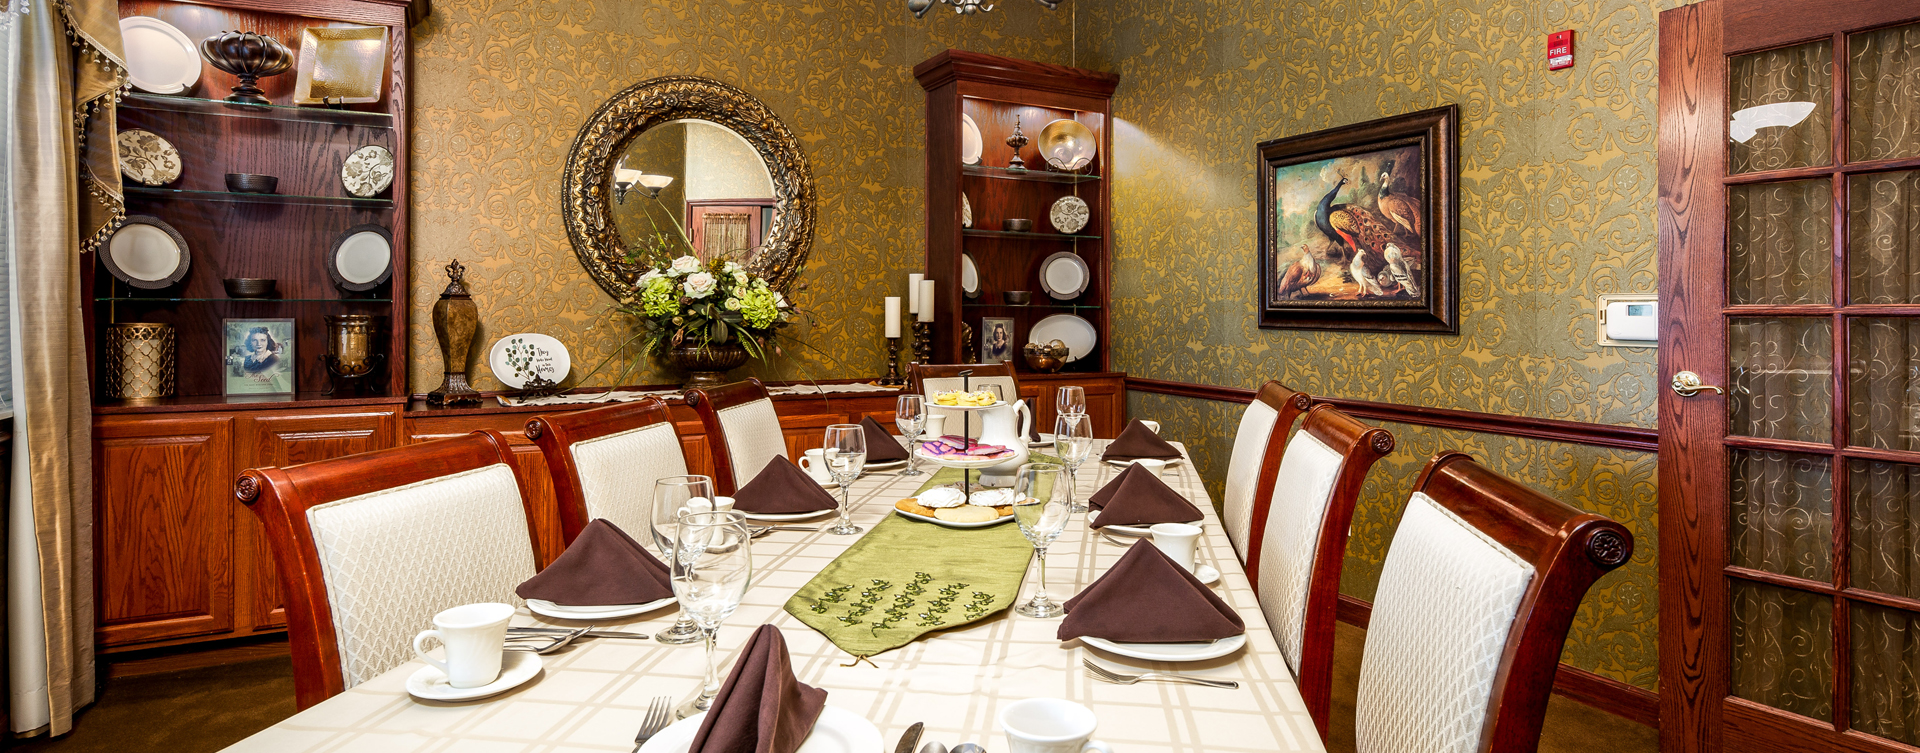 Have fun with themed and holiday meals in the private dining room at Bickford of Battle Creek